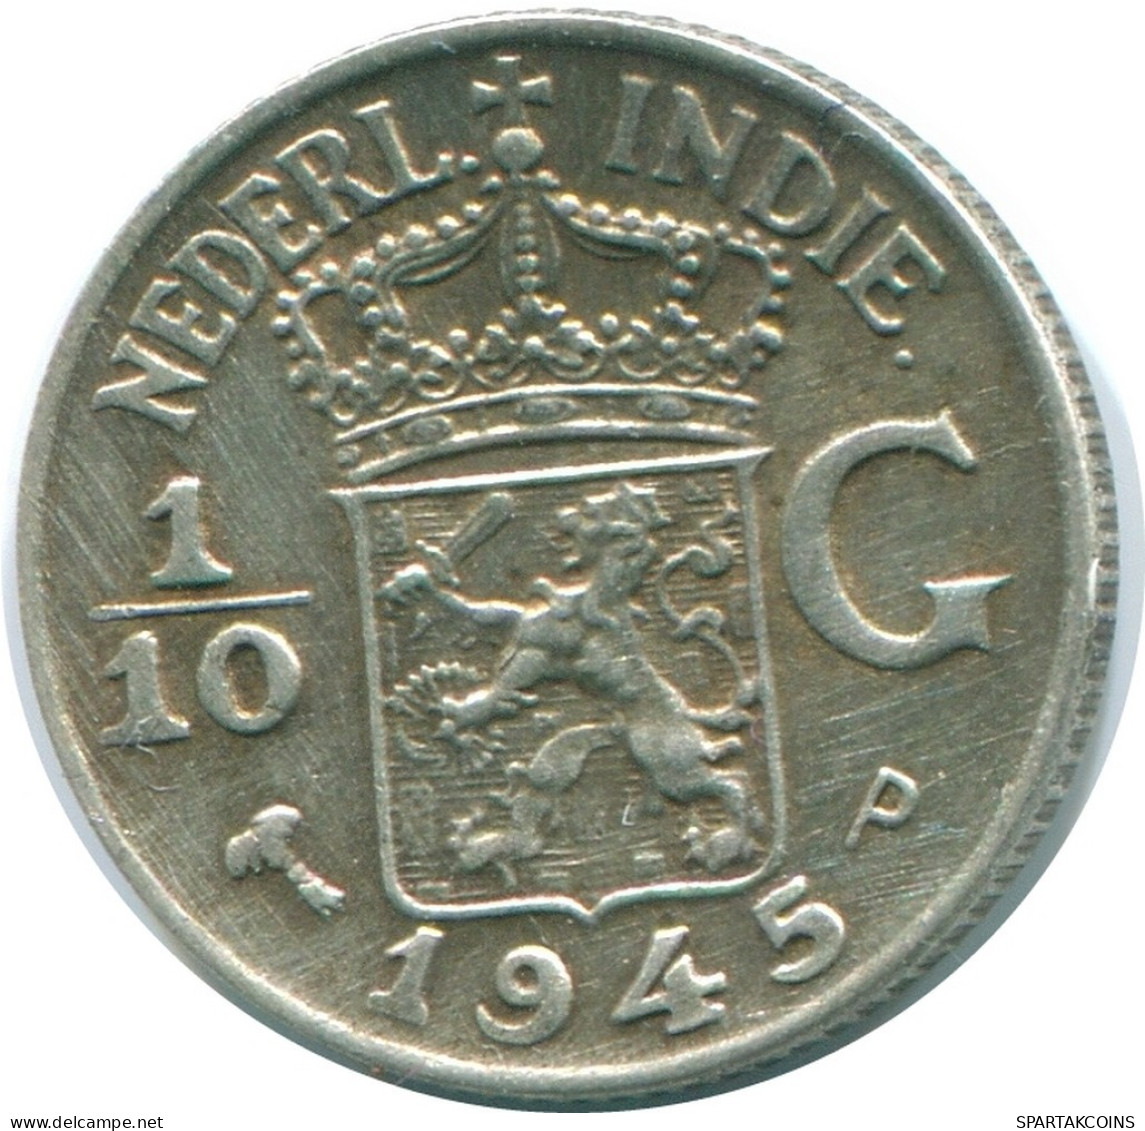 1/10 GULDEN 1945 P NETHERLANDS EAST INDIES SILVER Colonial Coin #NL14072.3.U.A